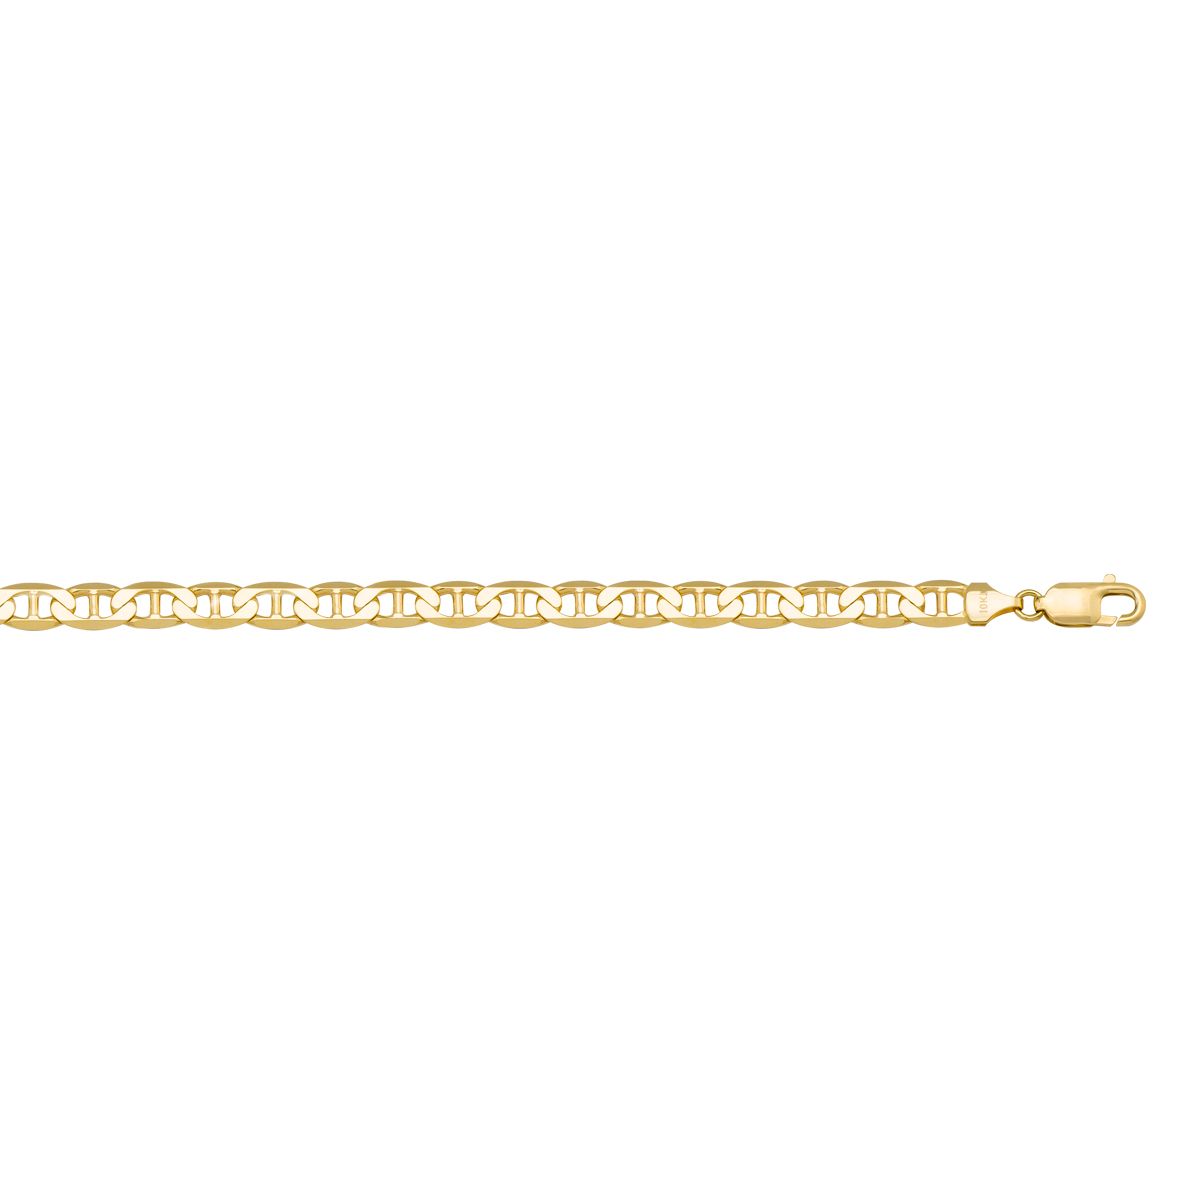 CANC04, Gold Chain, Flat Anchor, Yellow Gold, 4.5 to 7.5 mm